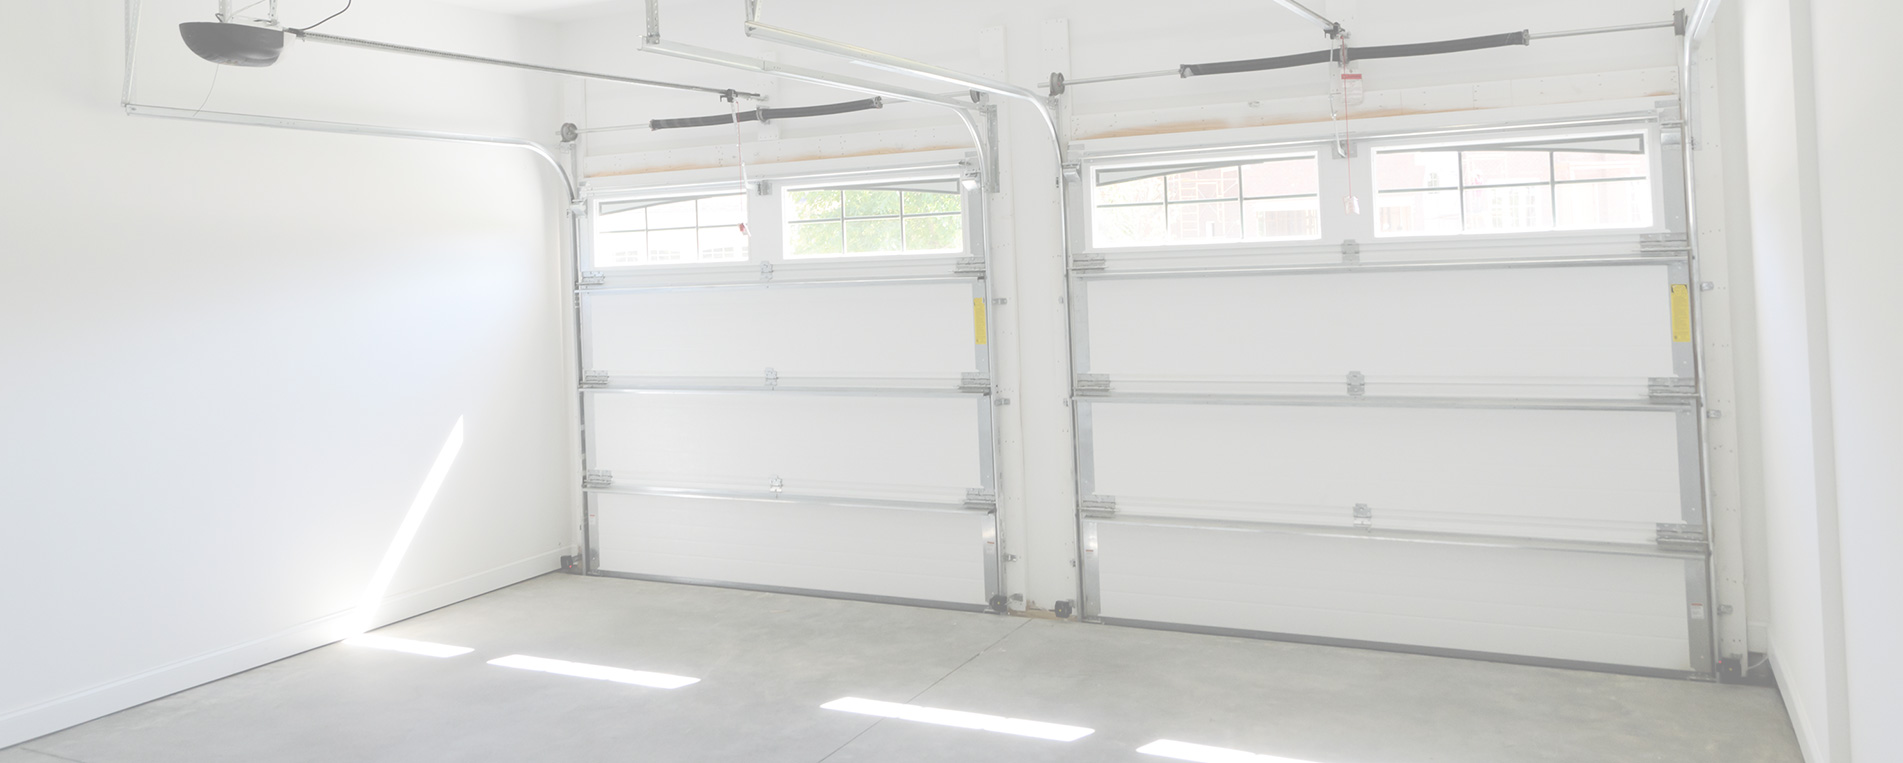 How To Choose The Right Type Of Garage Door Opener For You